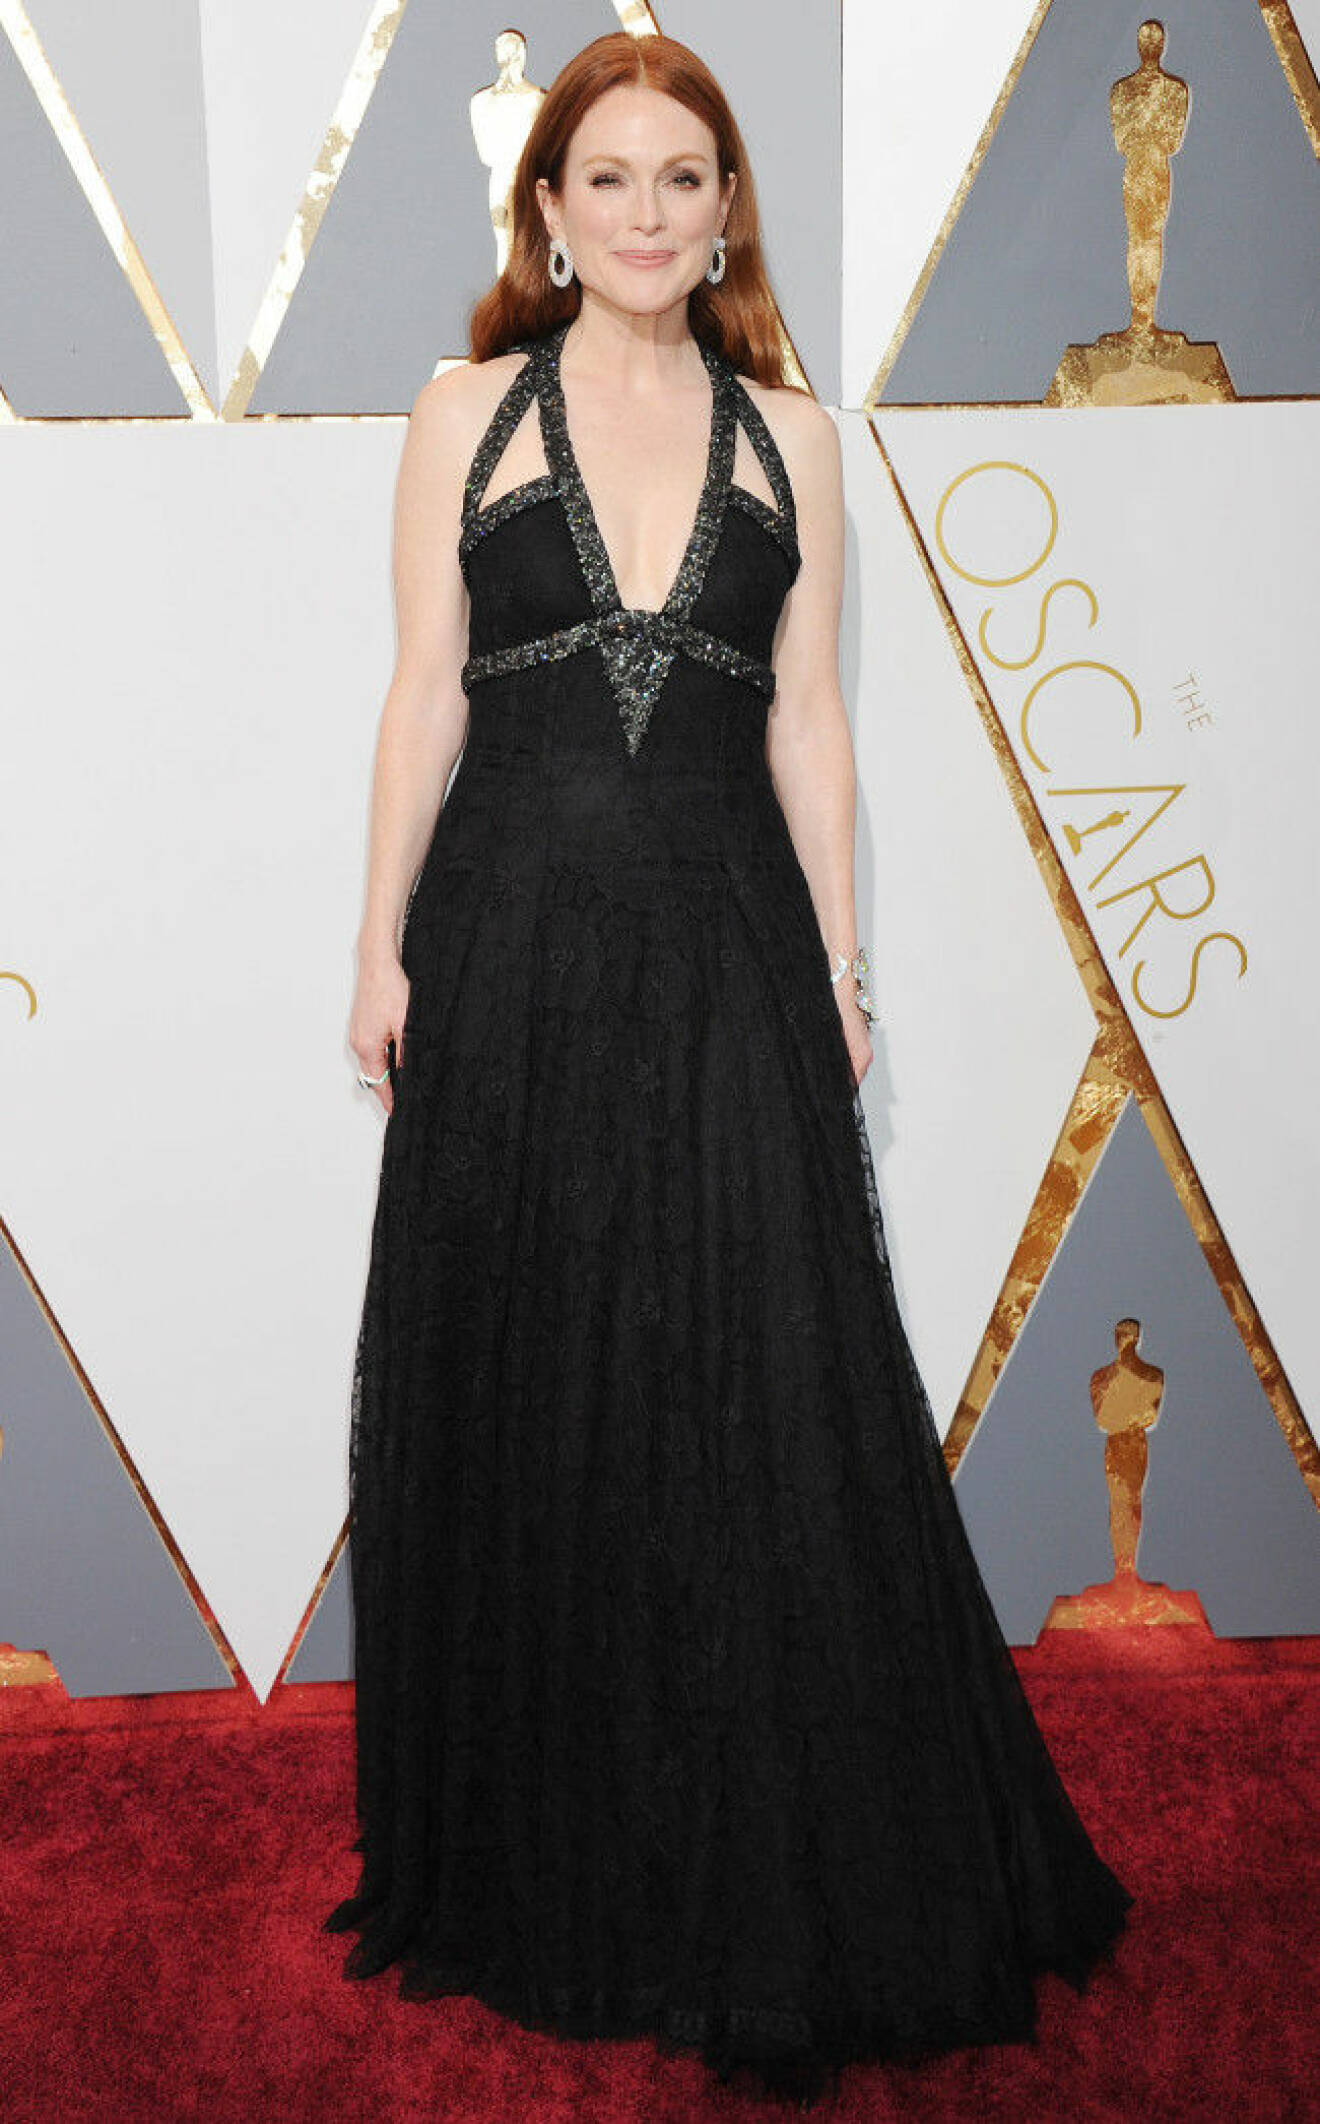 Mandatory Credit: Photo by Broadimage/REX/Shutterstock (5600246fm) Julianne Moore 88th Annual Academy Awards, Arrivals, Los Angeles, America - 28 Feb 2016 88th Annual Academy Awards - Arrivals WEARING CHANEL